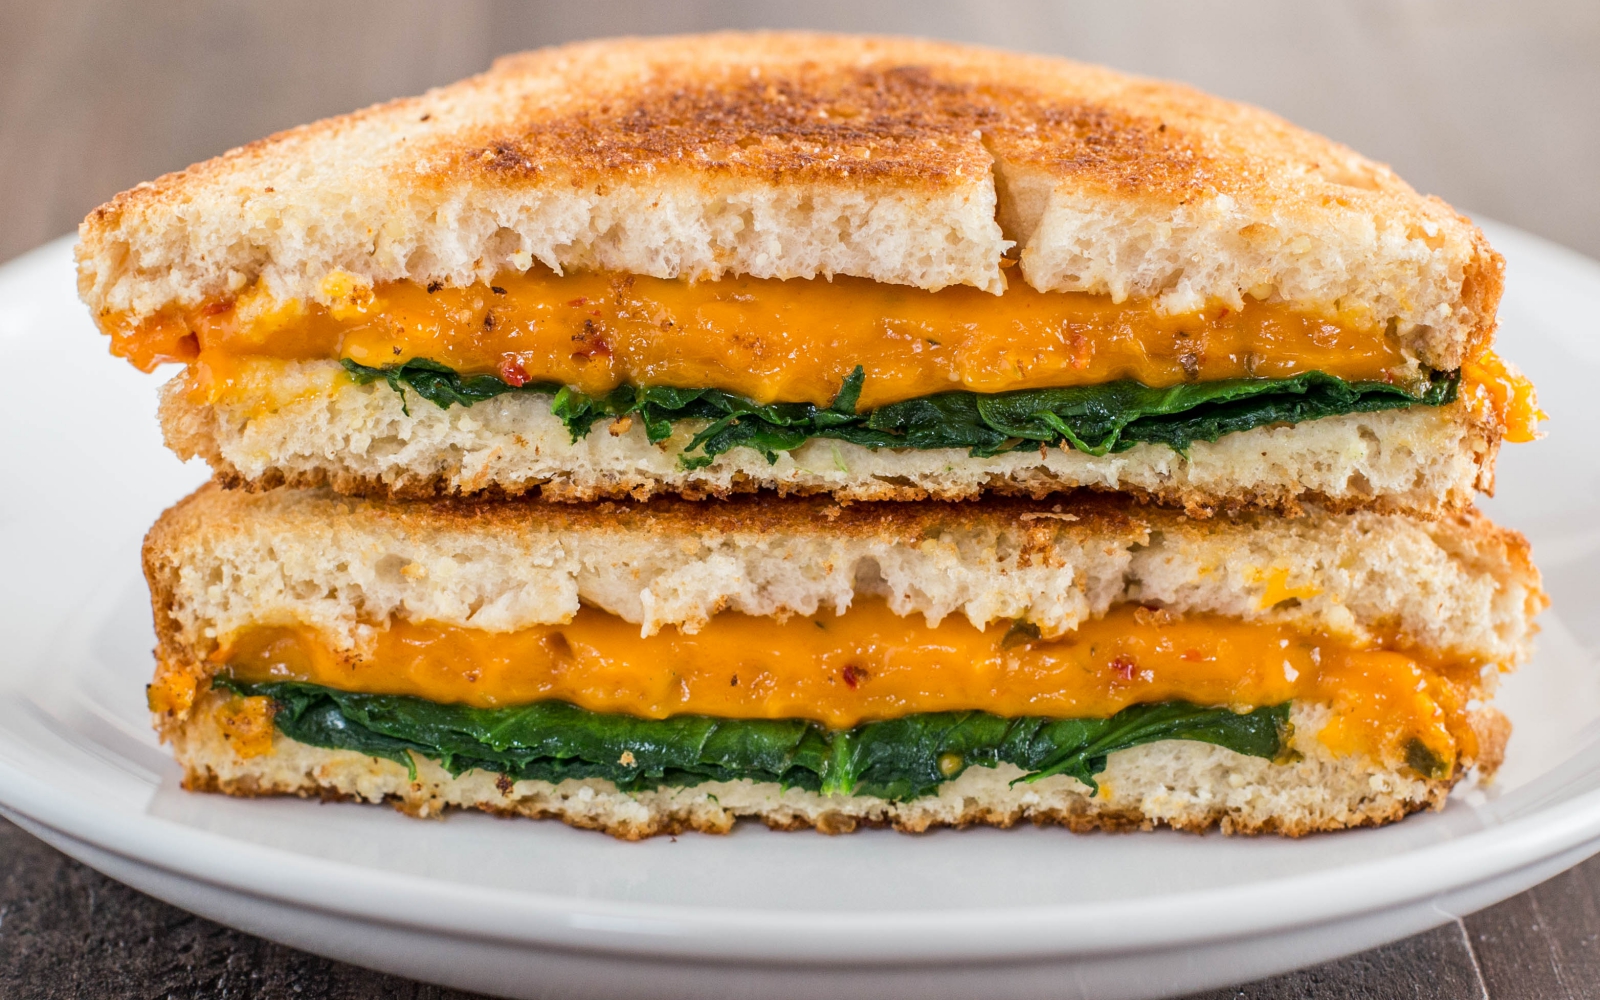 Vegan Gluten-Free Grilled Cheese with greens